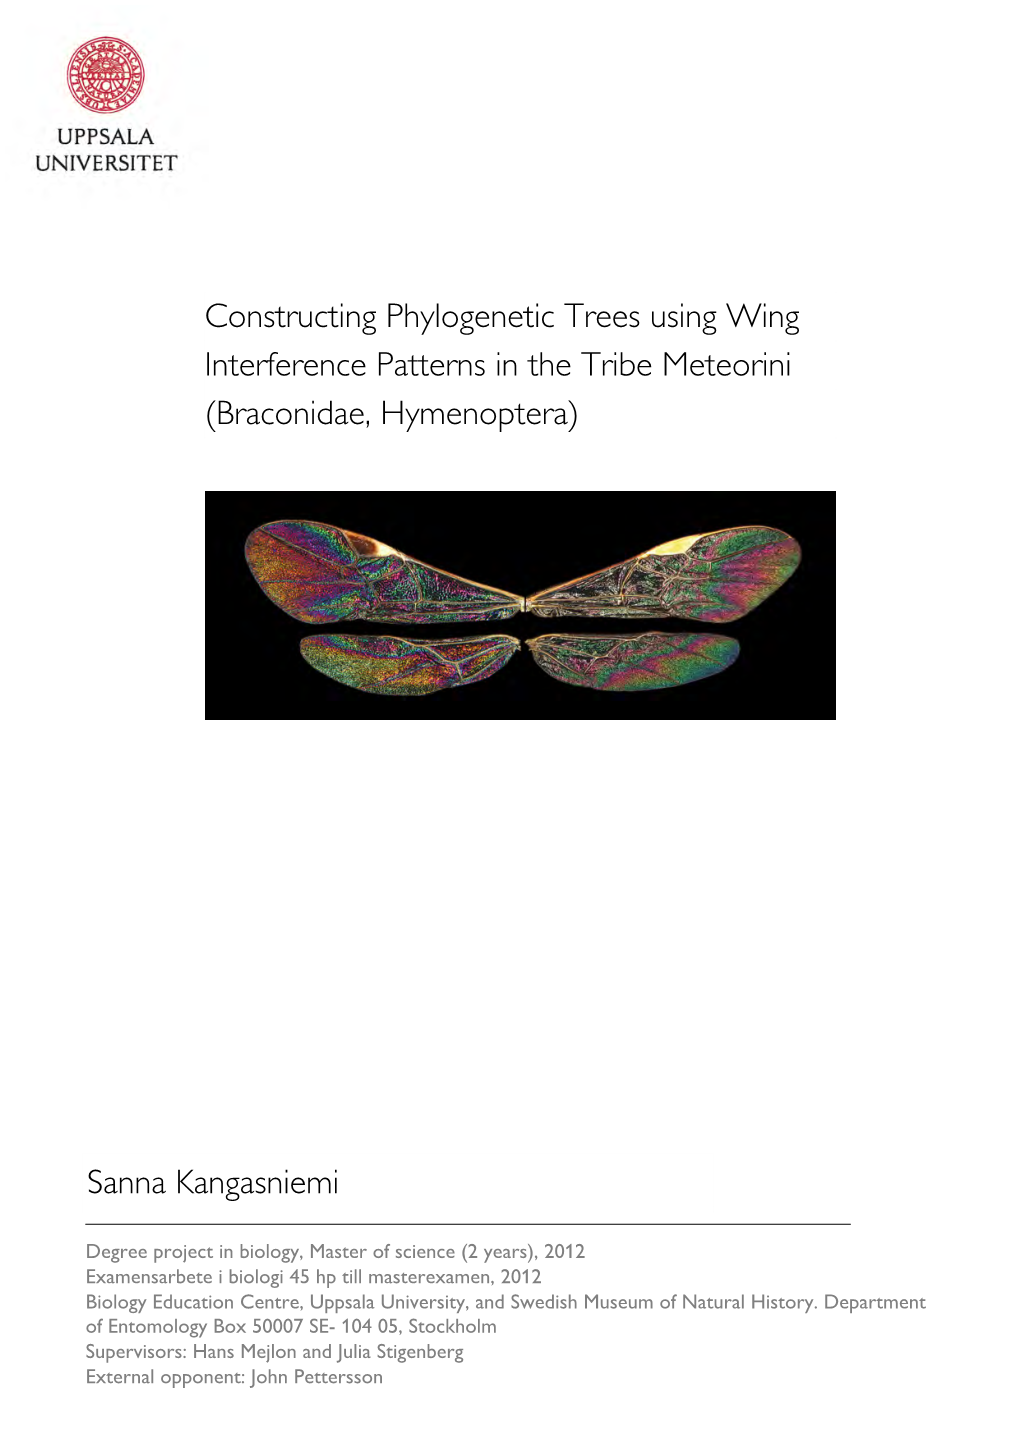 Constructing Phylogenetic Trees Using Wing Interference Patterns in the Tribe Meteorini (Braconidae, Hymenoptera)